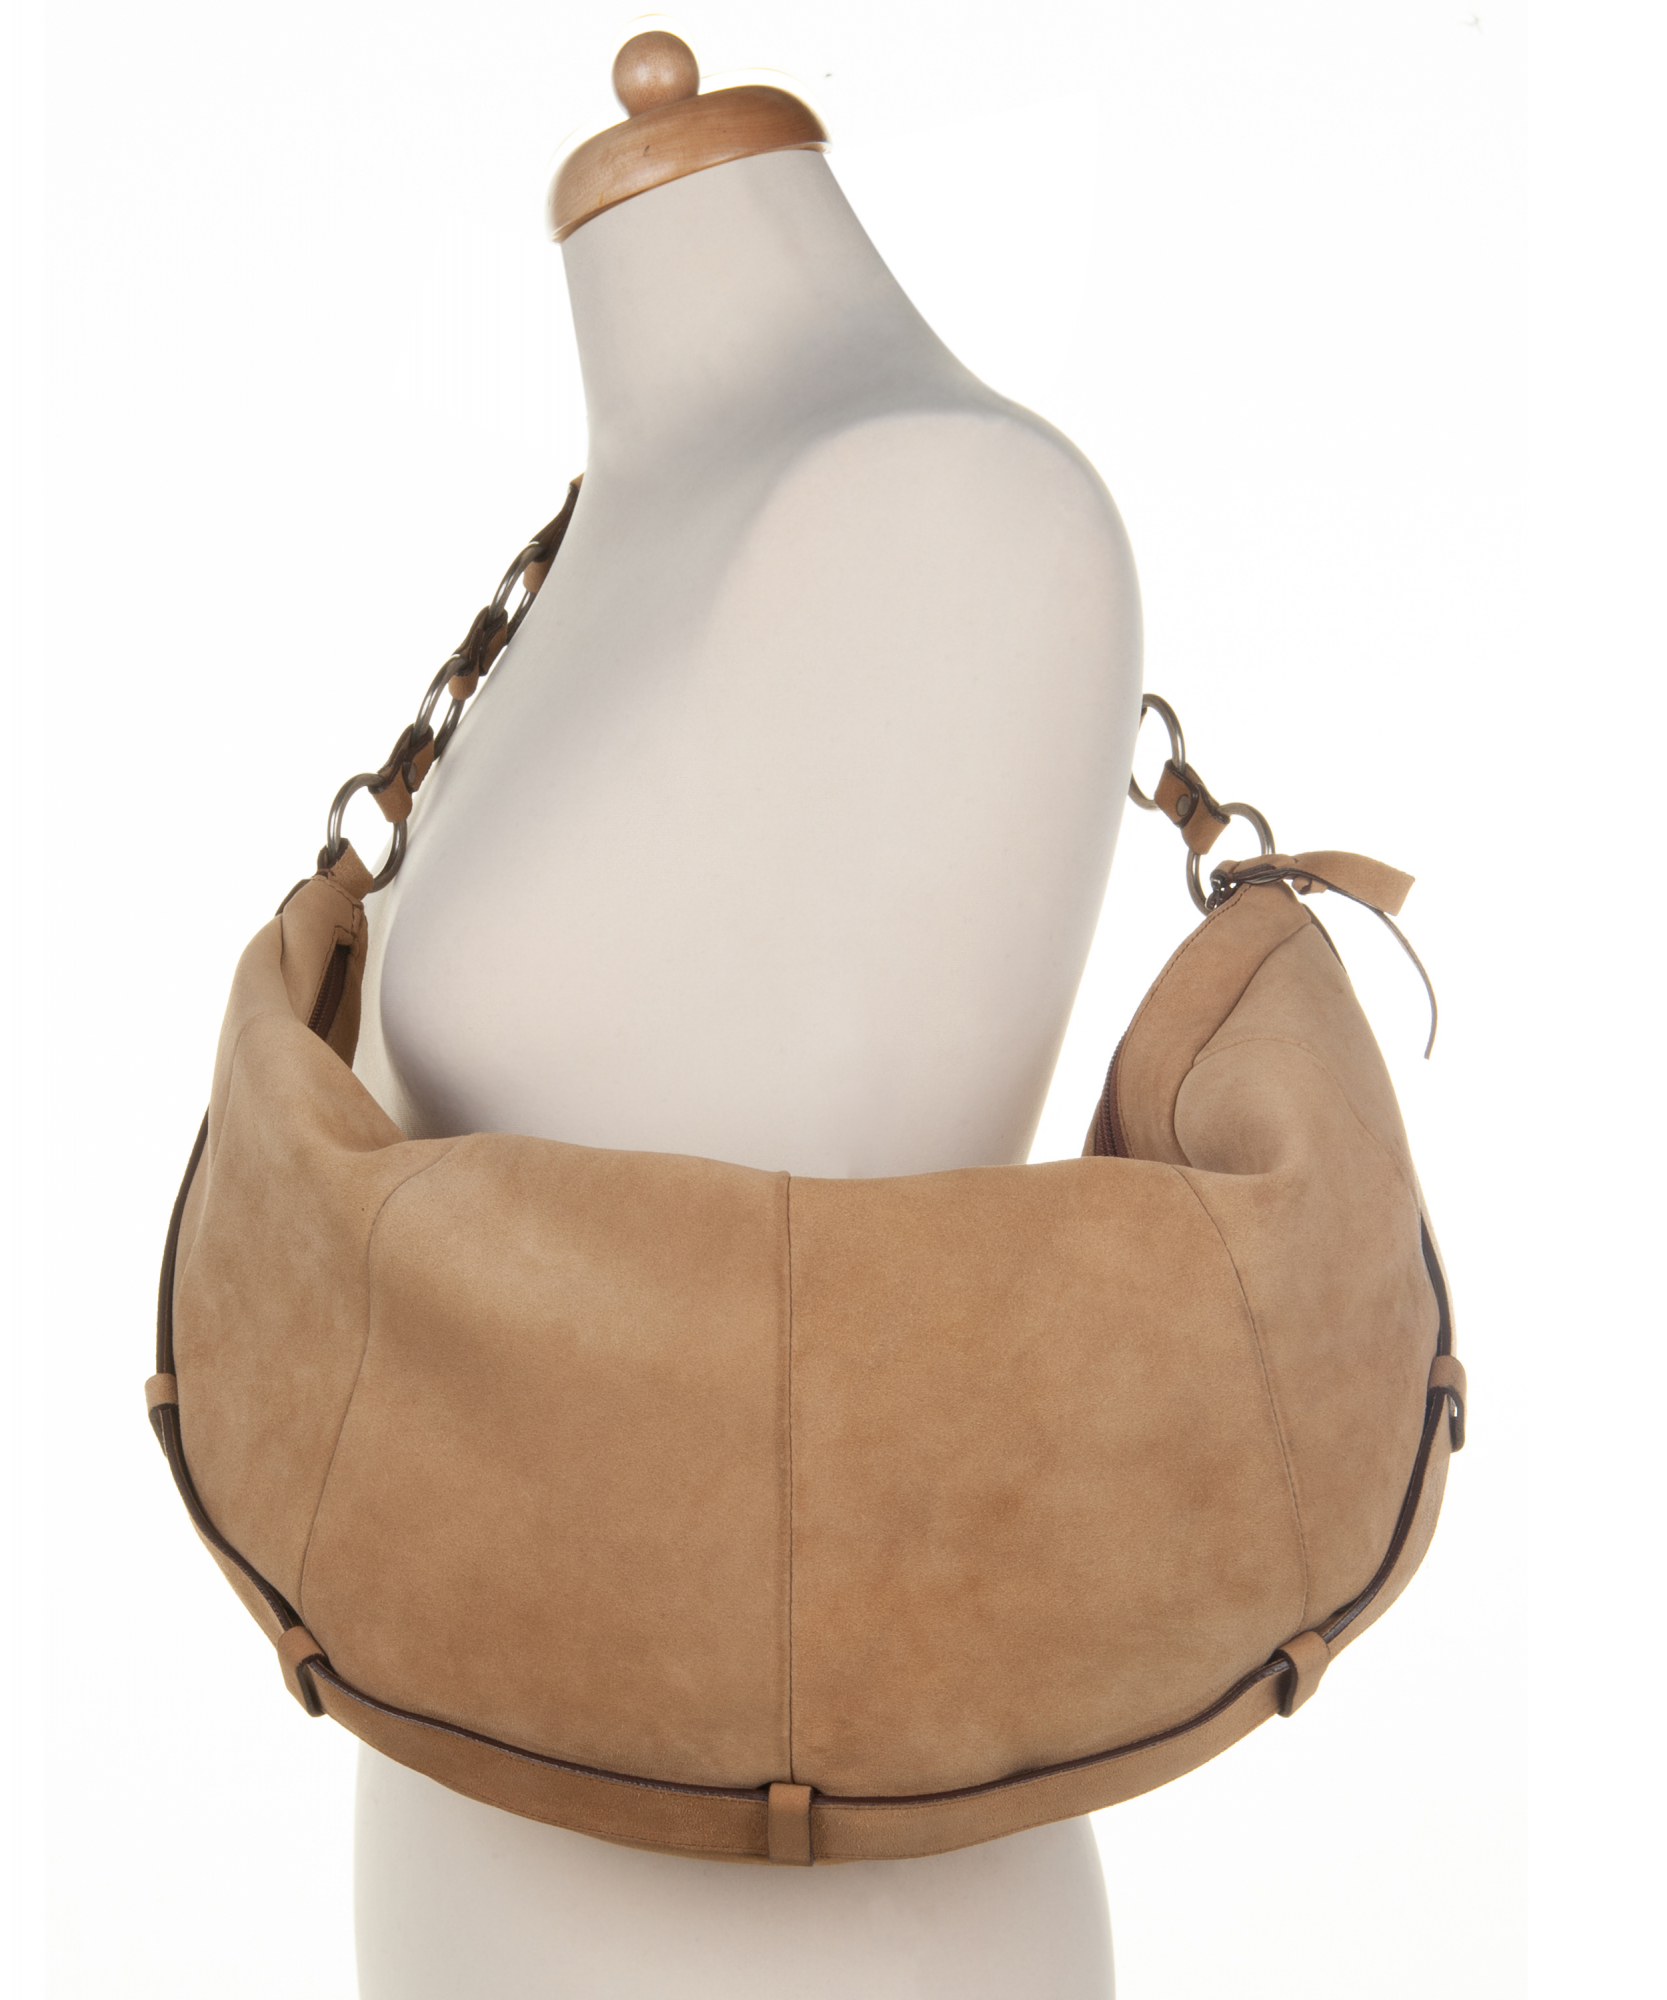 Yves Saint Laurent Iconic Taupe Suede Medium Hobo Bag with Horn Handle